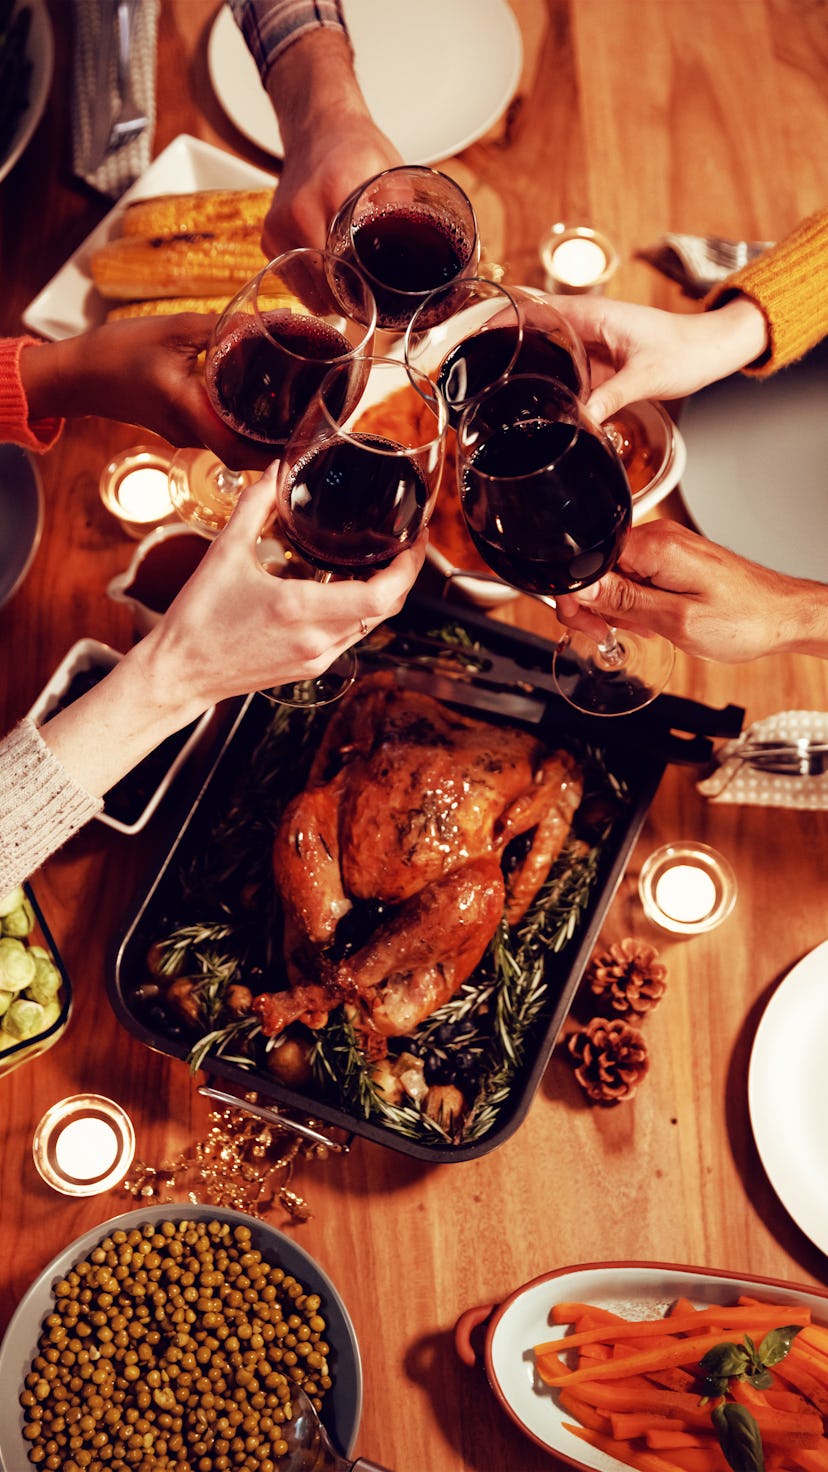 These Friendsgiving recipes are great for trying something new.